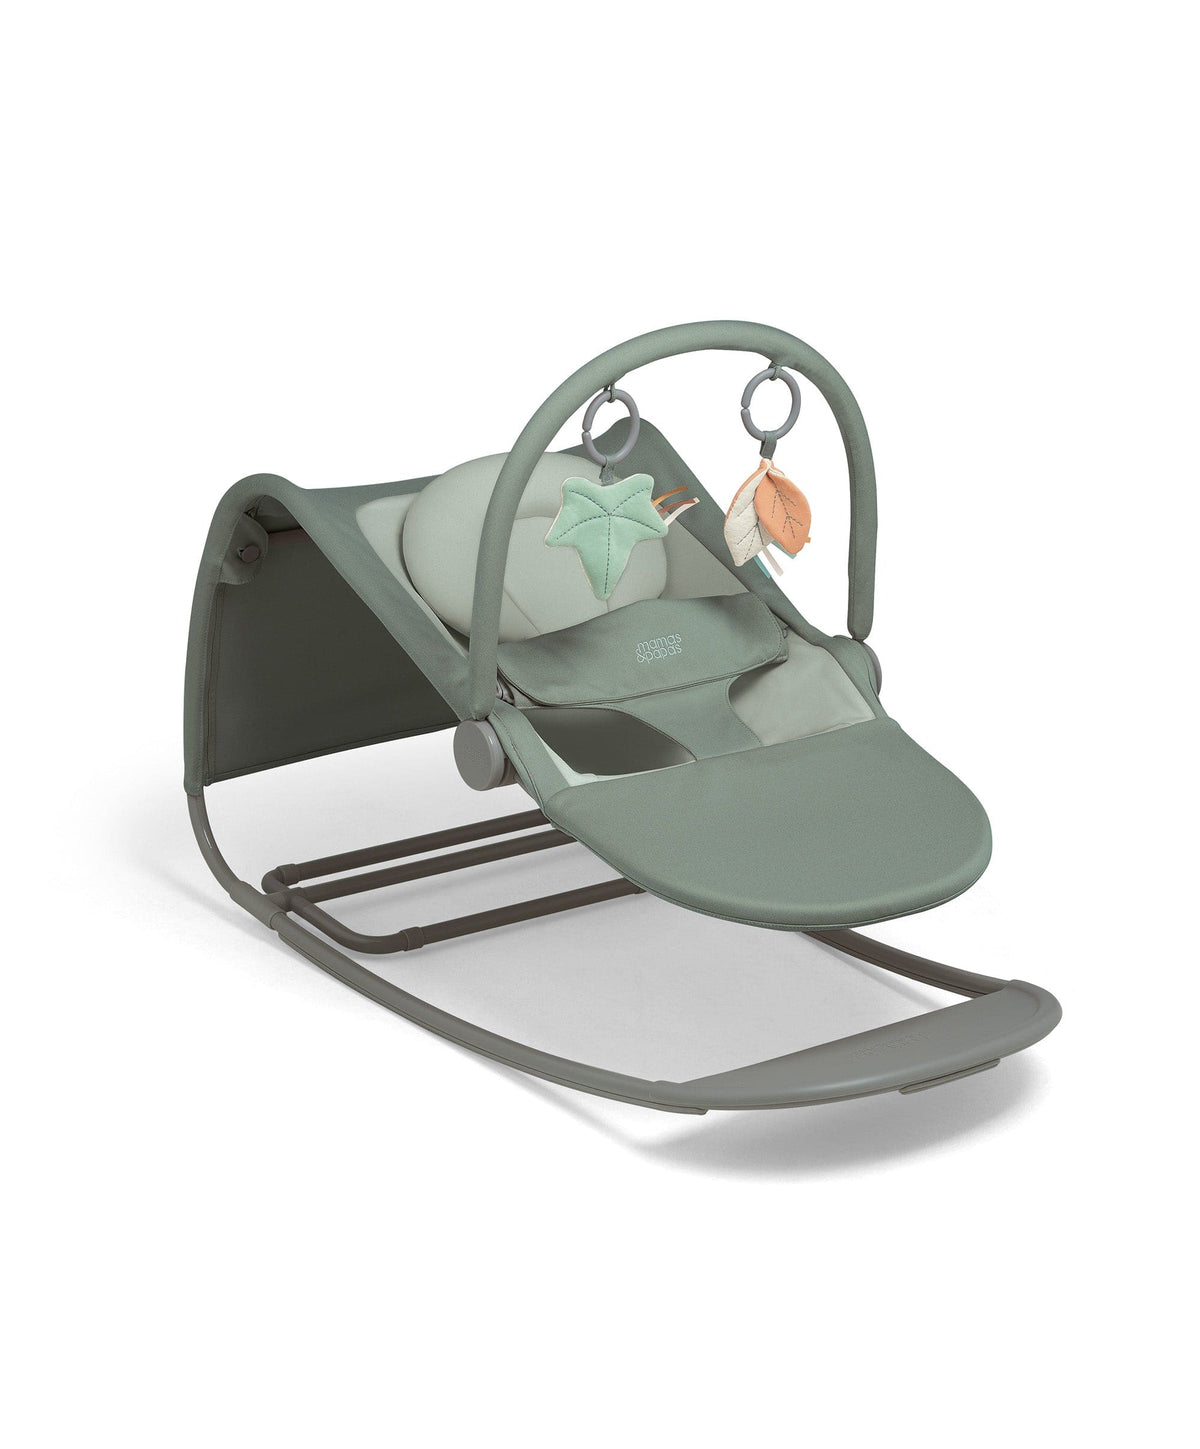 Beaba Up and Down Bouncer lll review - Bouncer & rocker chairs - Cots,  night-time & nursery